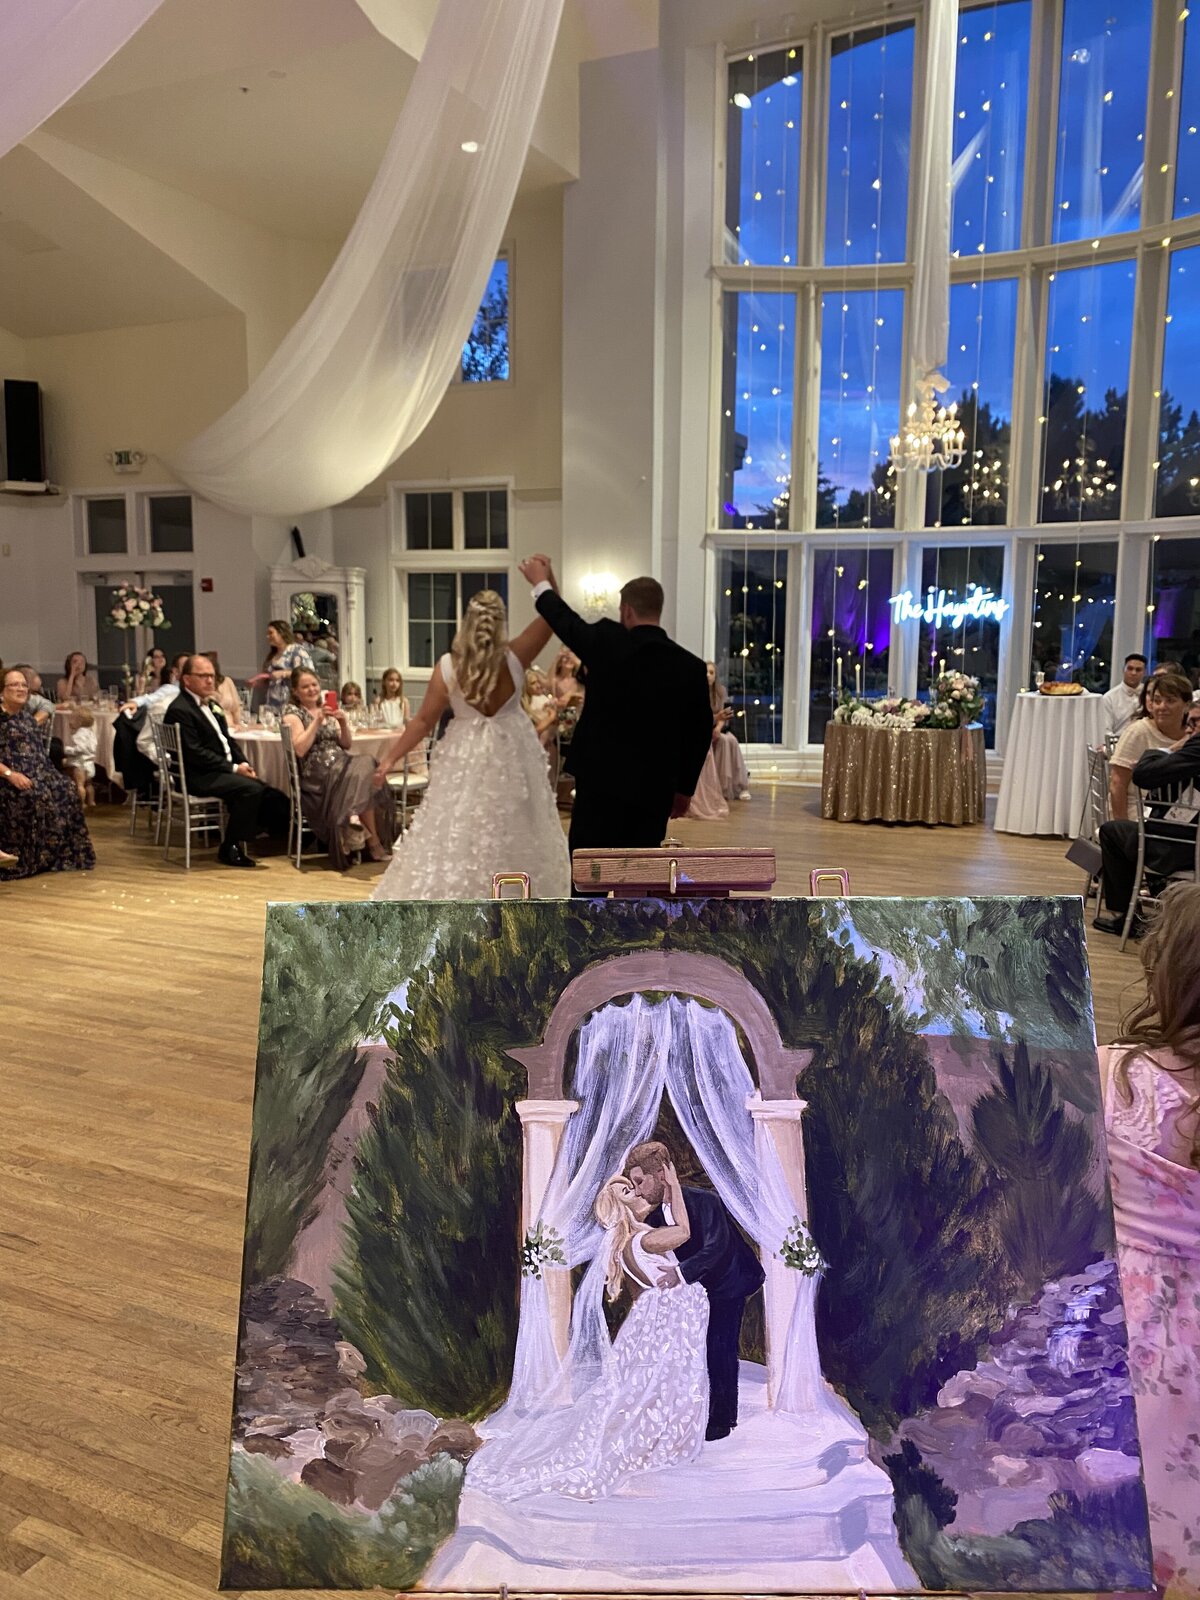 A couple dances during their reception while the artist works on the ceremony painting